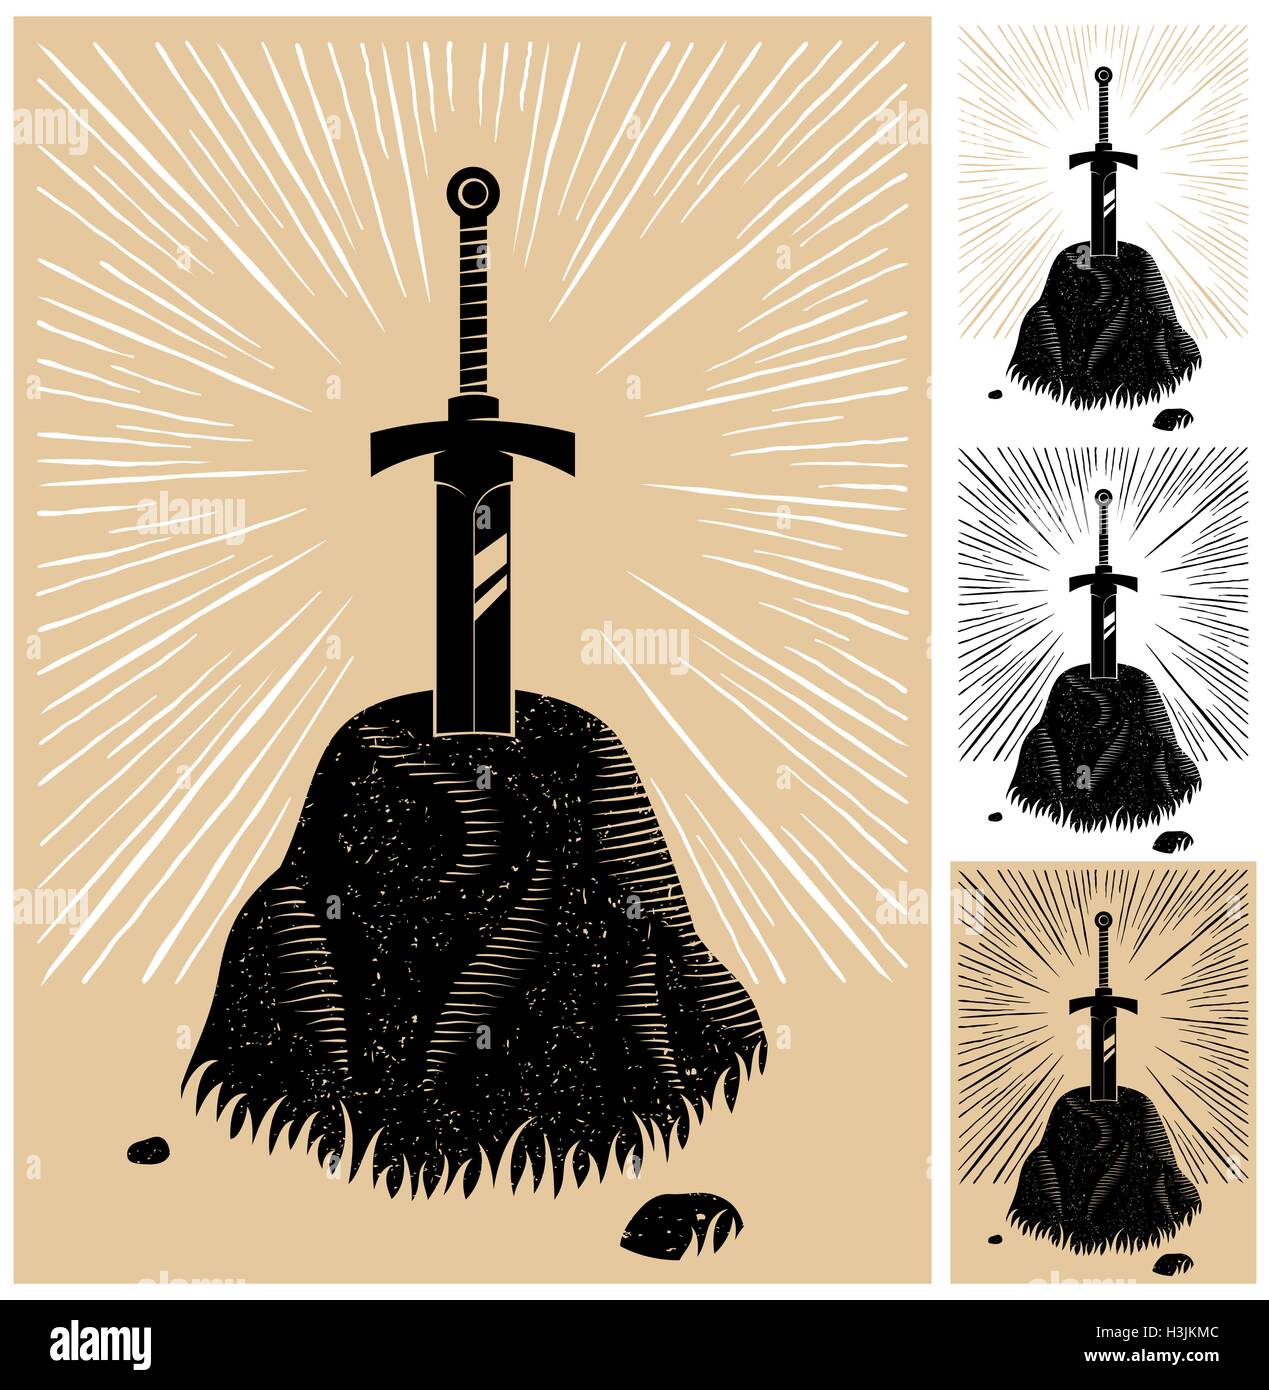 Illustration of King Arthurs Excalibur linocut style. 4 color versions. Stock Vector